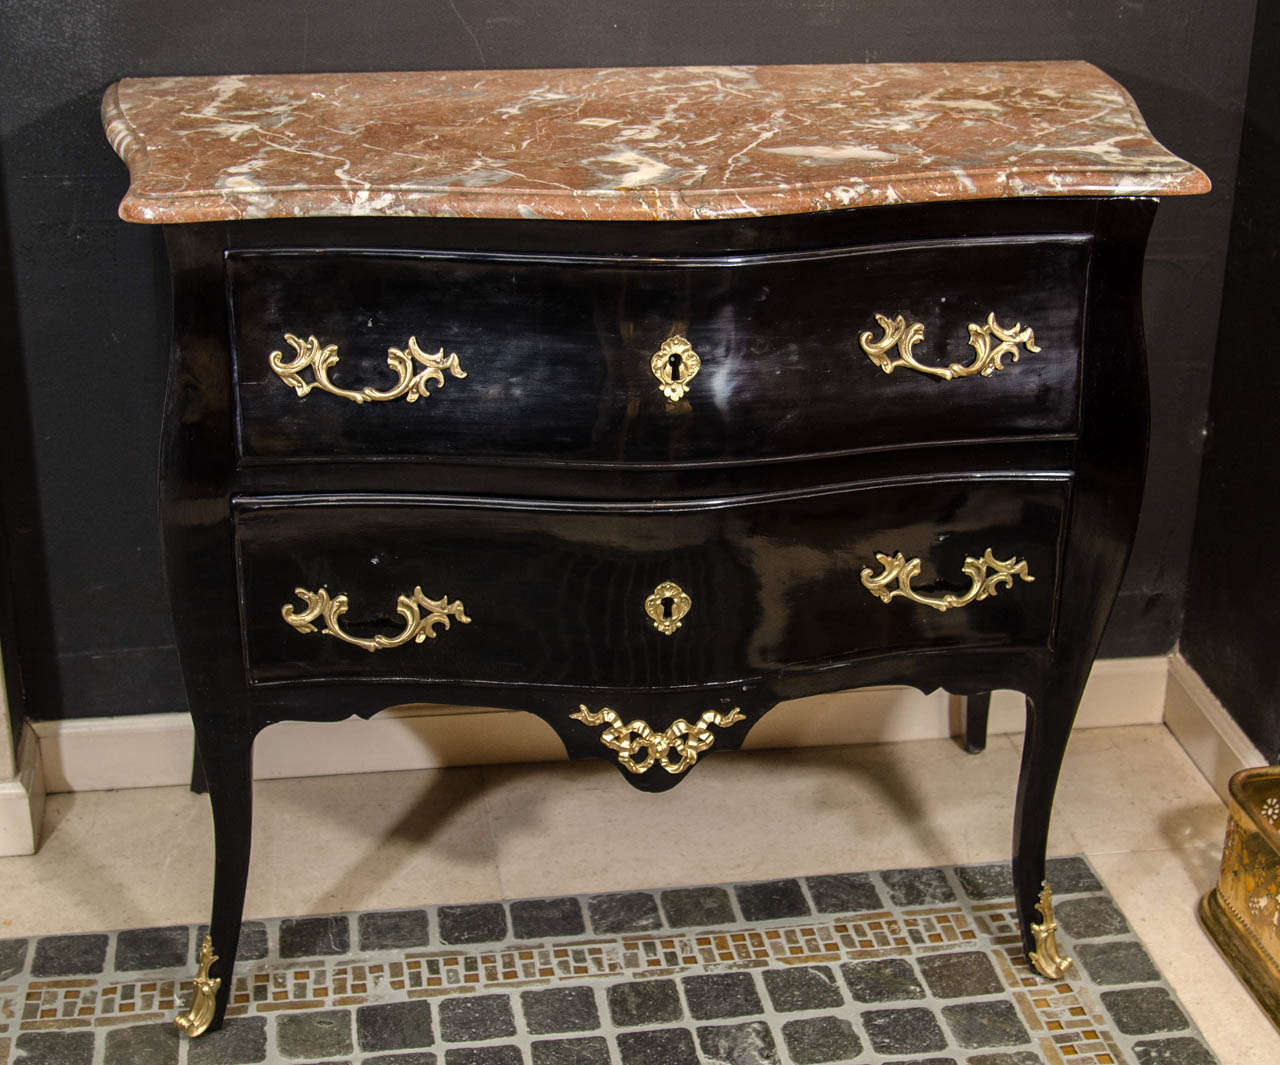 A fine French Louis XV marble-top black lacquered bronze-mounted serpentine commode, 18th century.